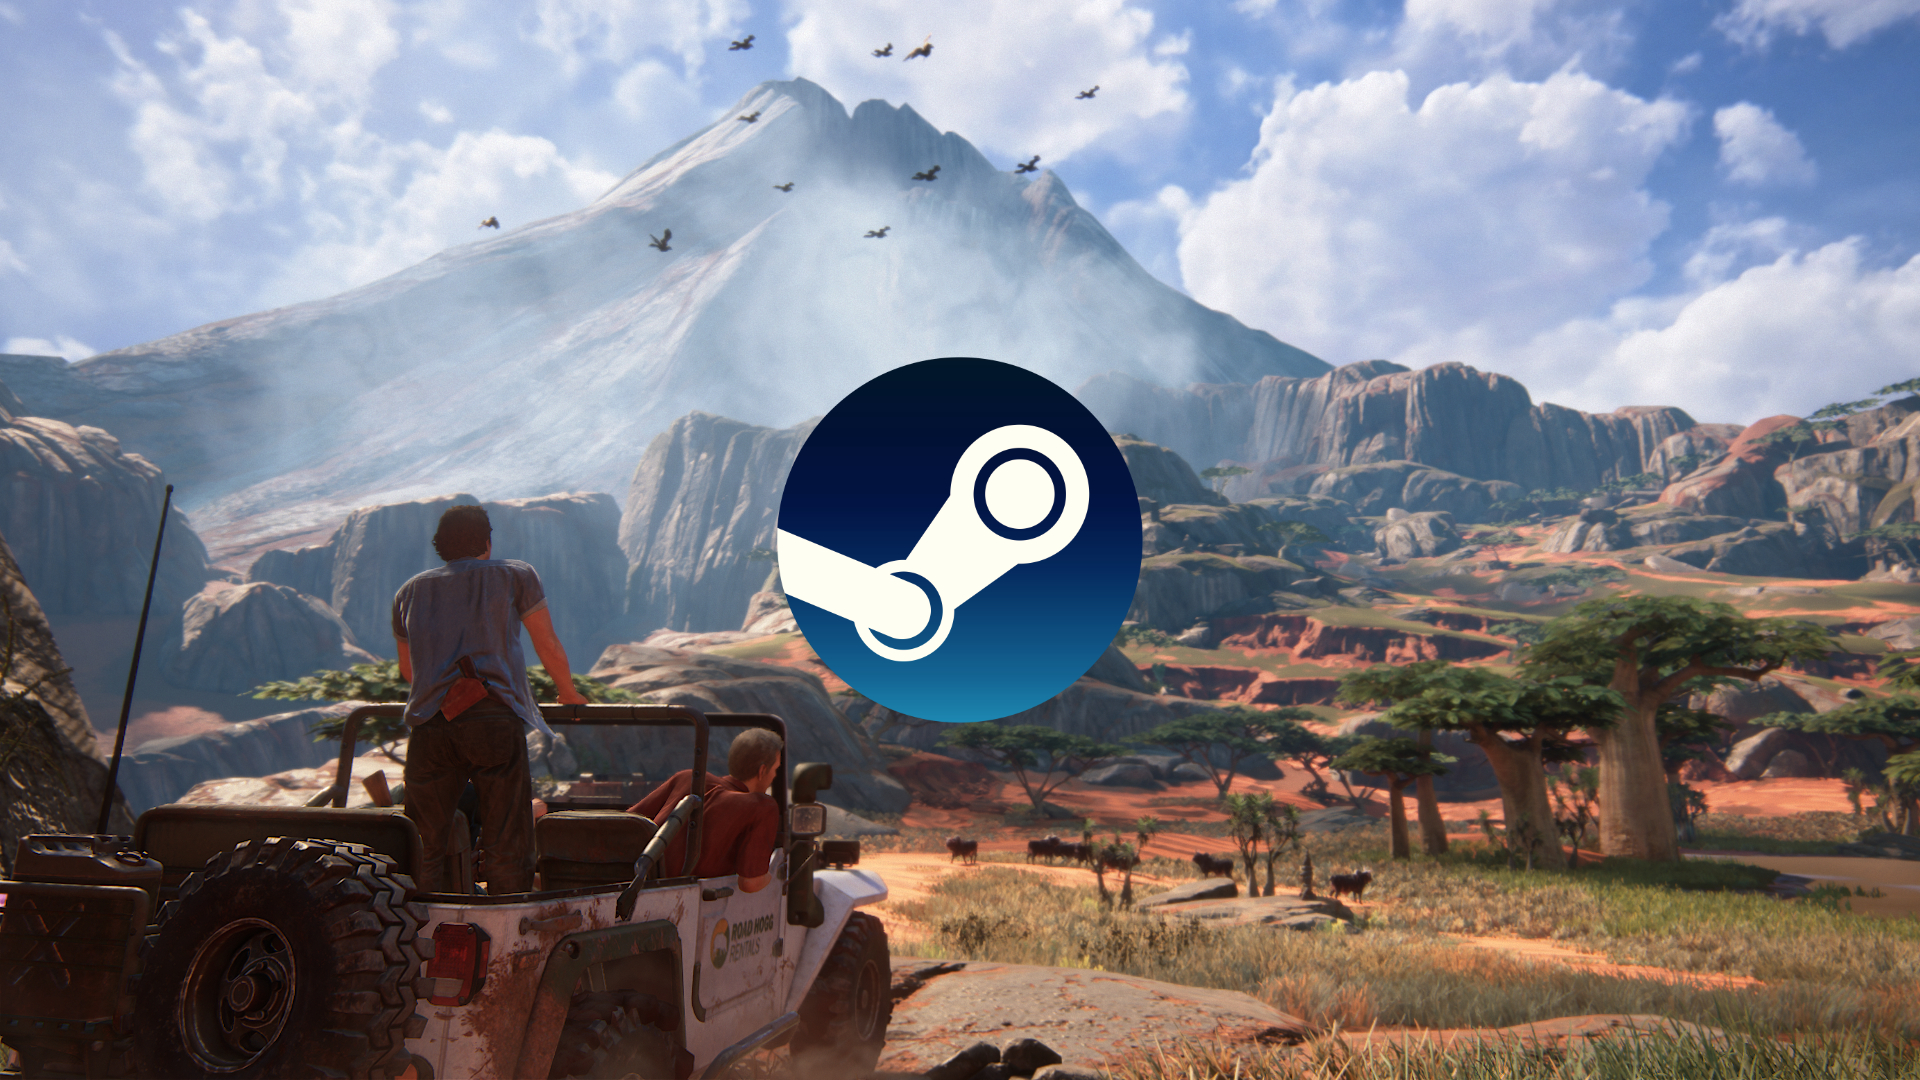 Uncharted 4 is coming to PC, according to recent Sony IR document